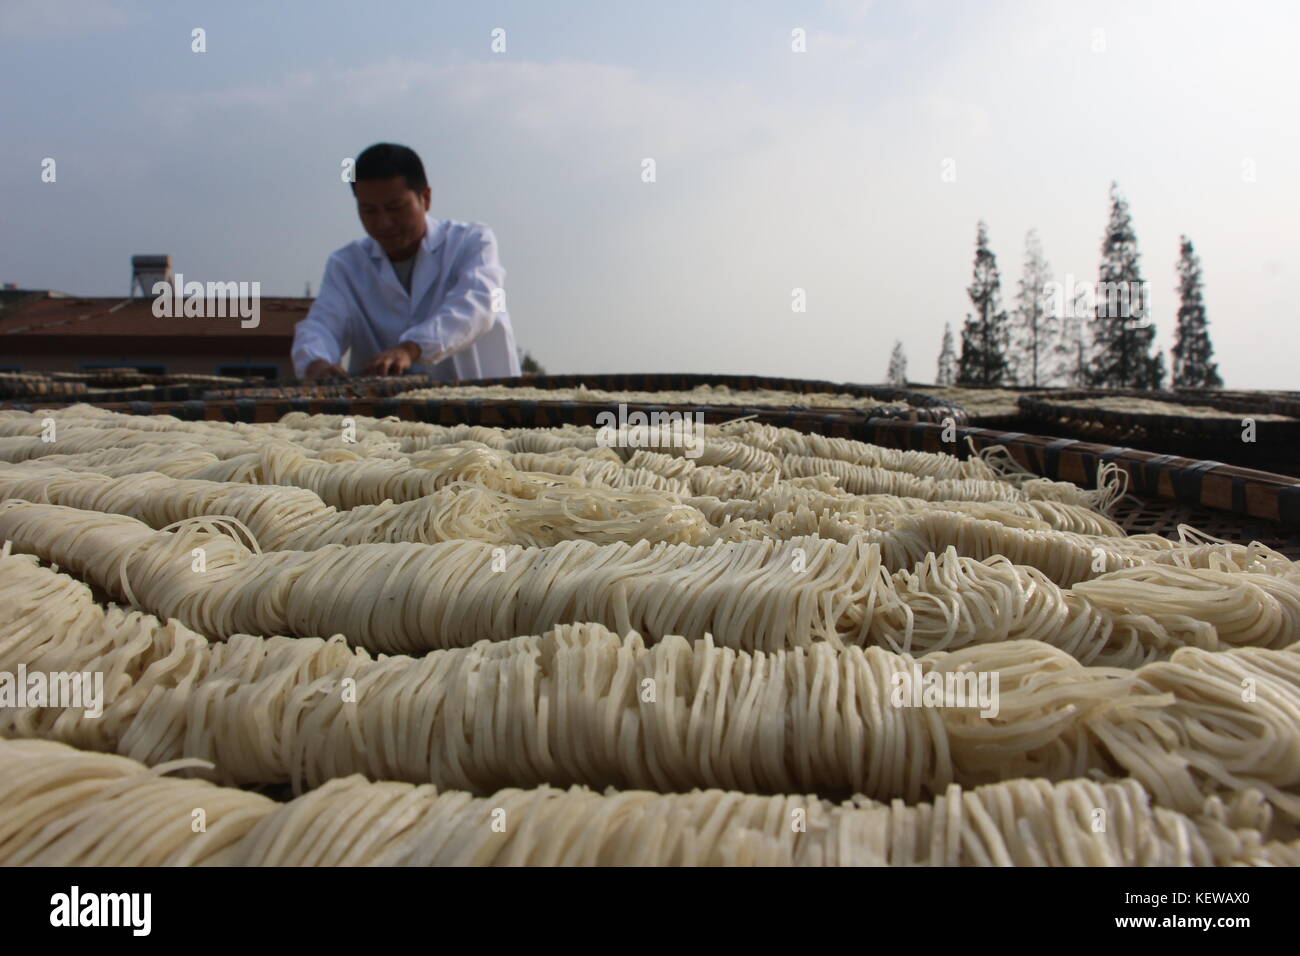 Xiaogan, China. 24th Oct, 2017.(EDITORIAL USE ONLY. CHINA OUT) .People are busy with making traditional fish meat noodle in Xiaogan, central China's Hubei Province. The fish meat noodle is a kind of traditional Chinese food. Credit: SIPA Asia/ZUMA Wire/Alamy Live News Stock Photo